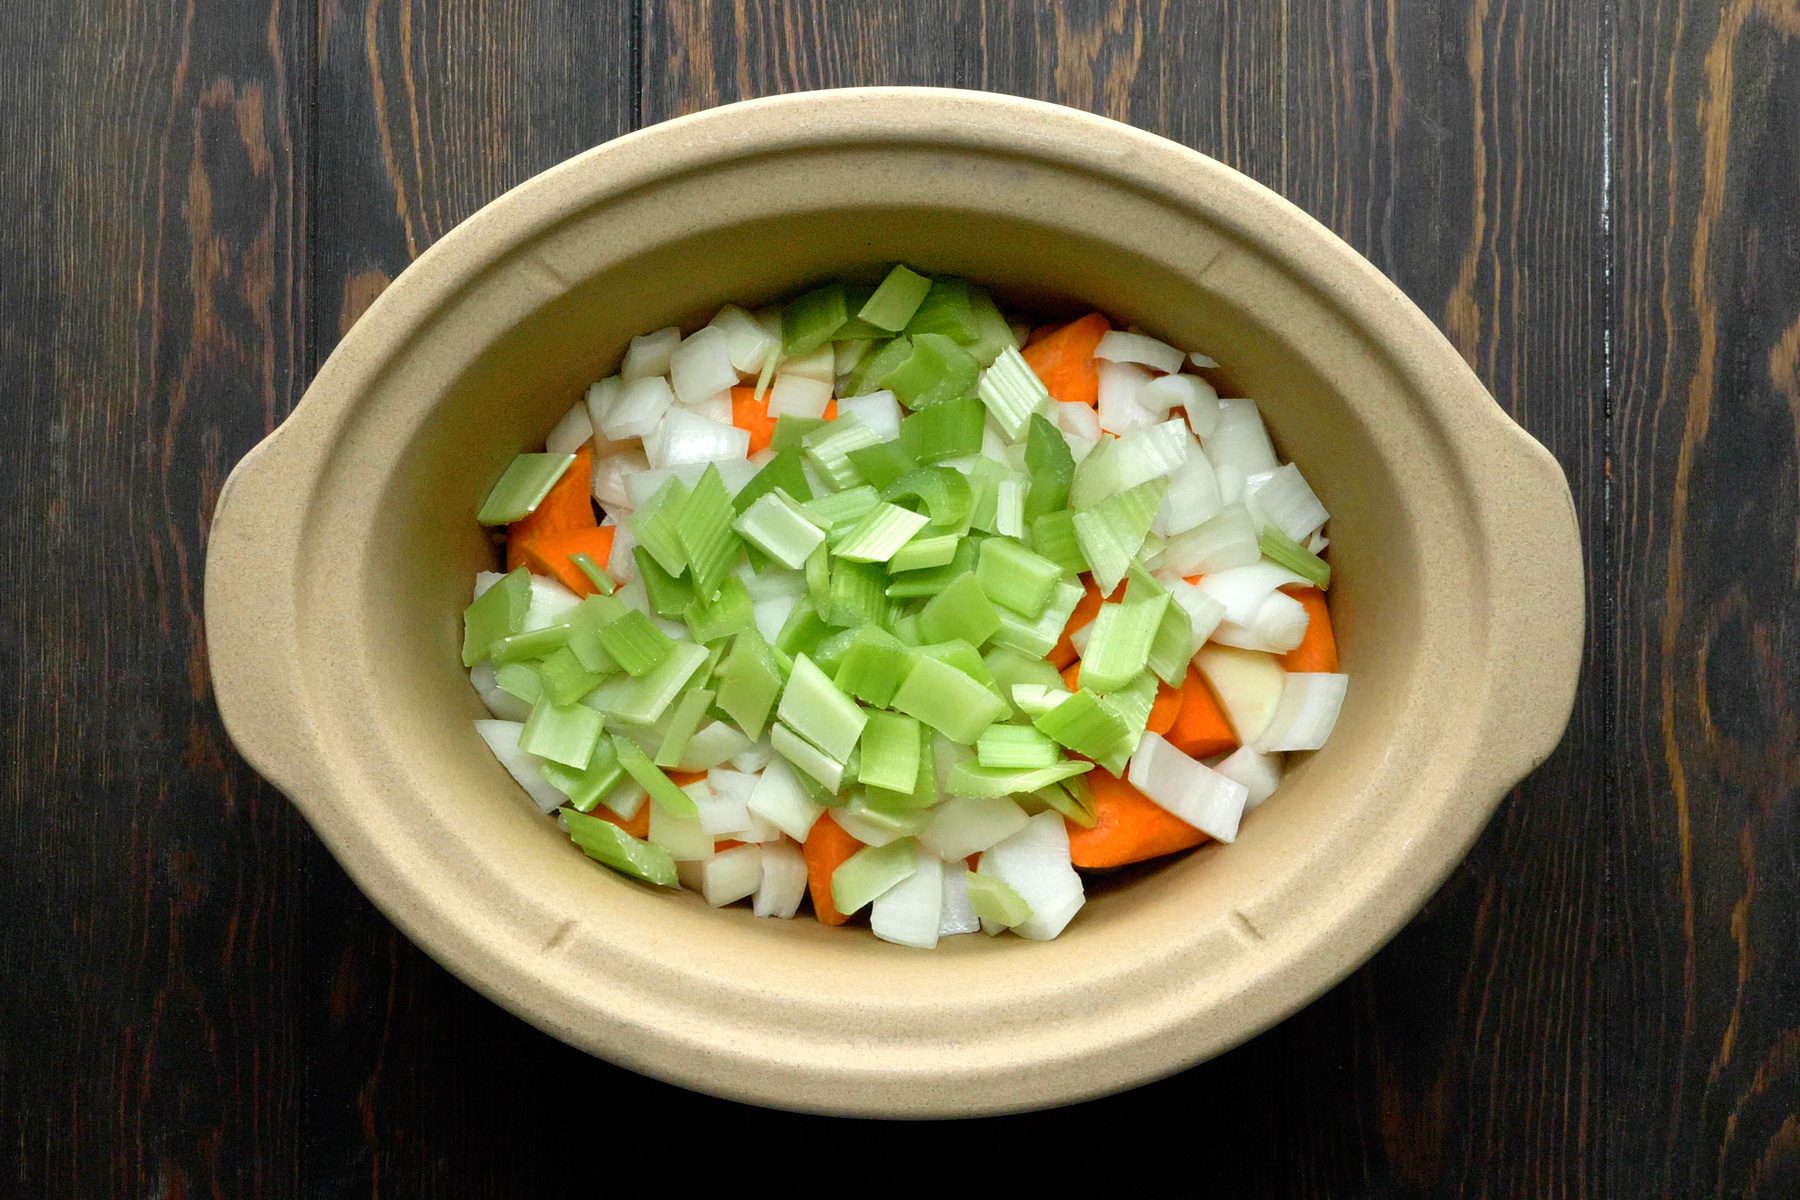 A slow cooker filled with chopped potatoes, carrots, onion and celery.